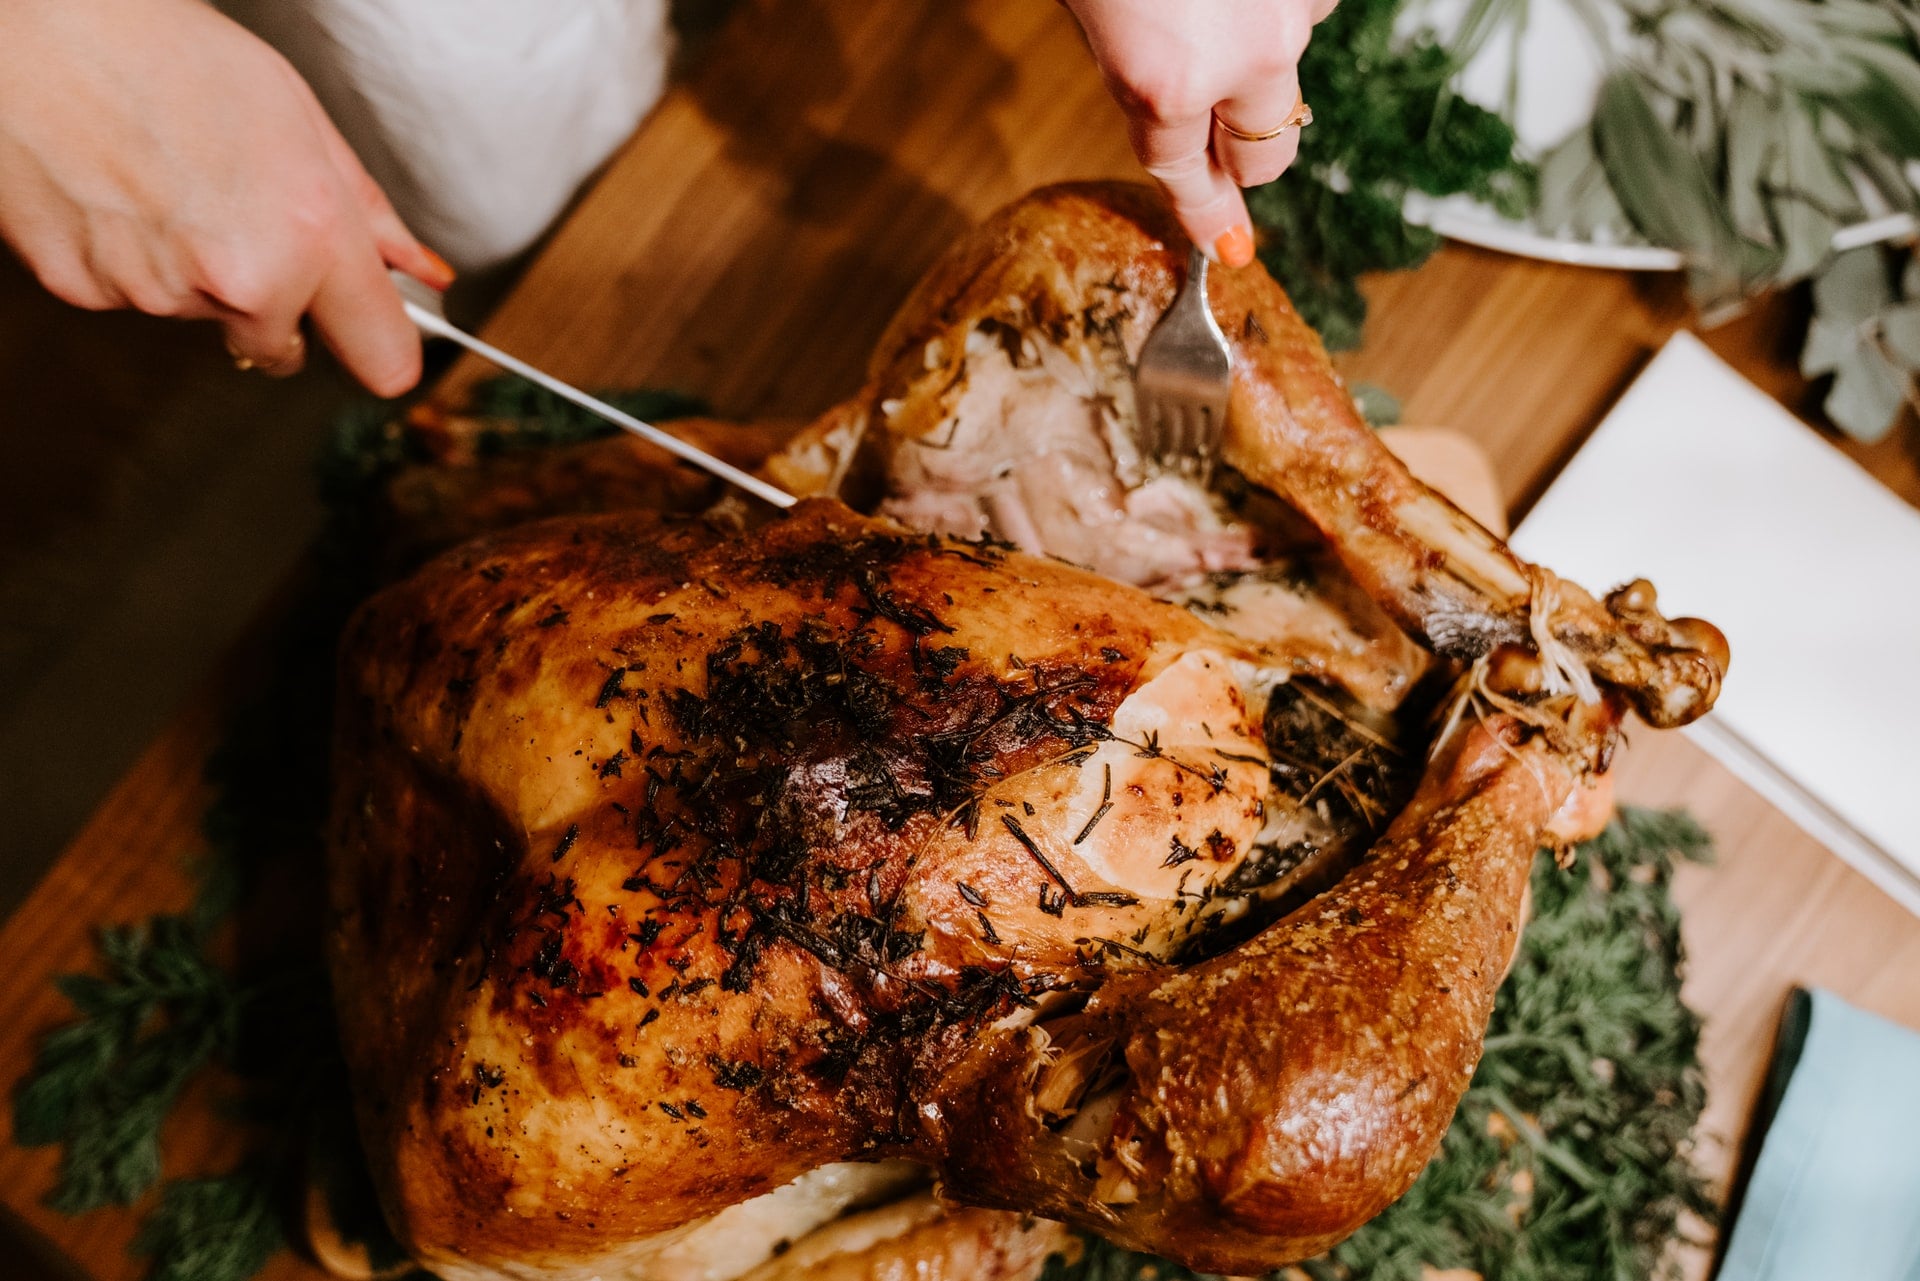 Woman's hands cutting into a golden brown roasted turkey covered in herbs and set on a wooden oak table